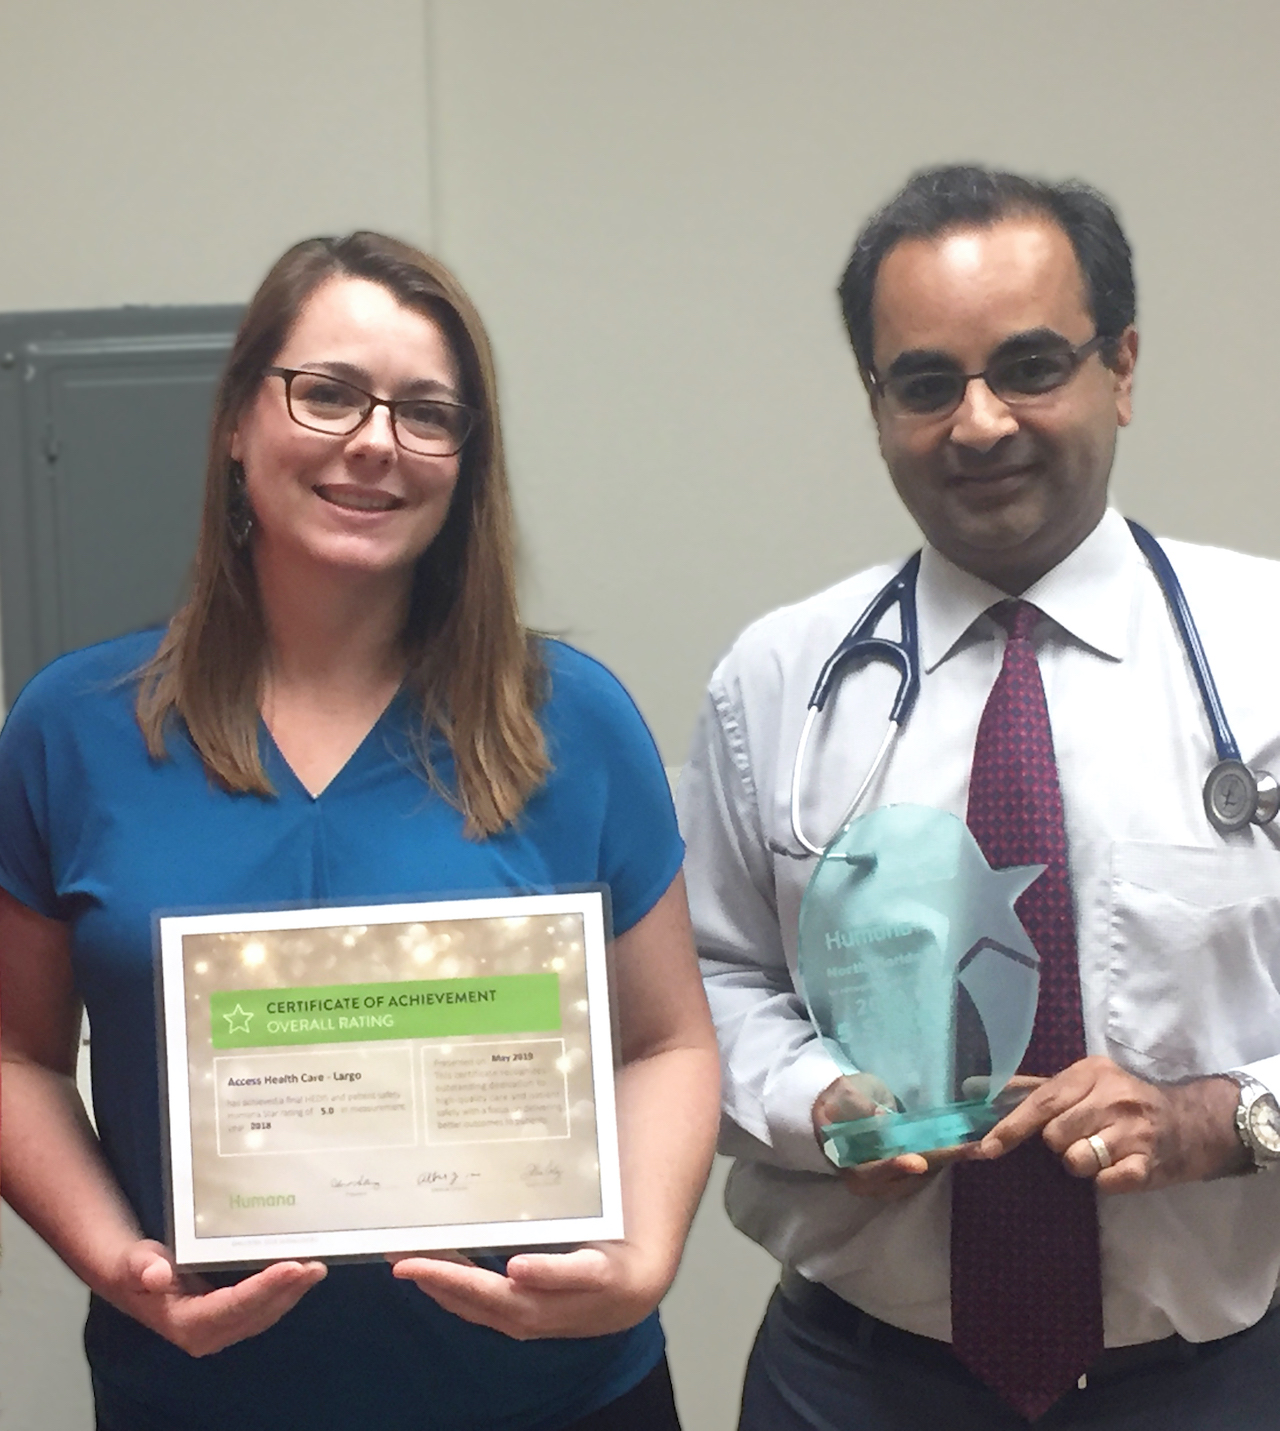 Apurva Shah, MD and Team Receive 5 Star Recognition